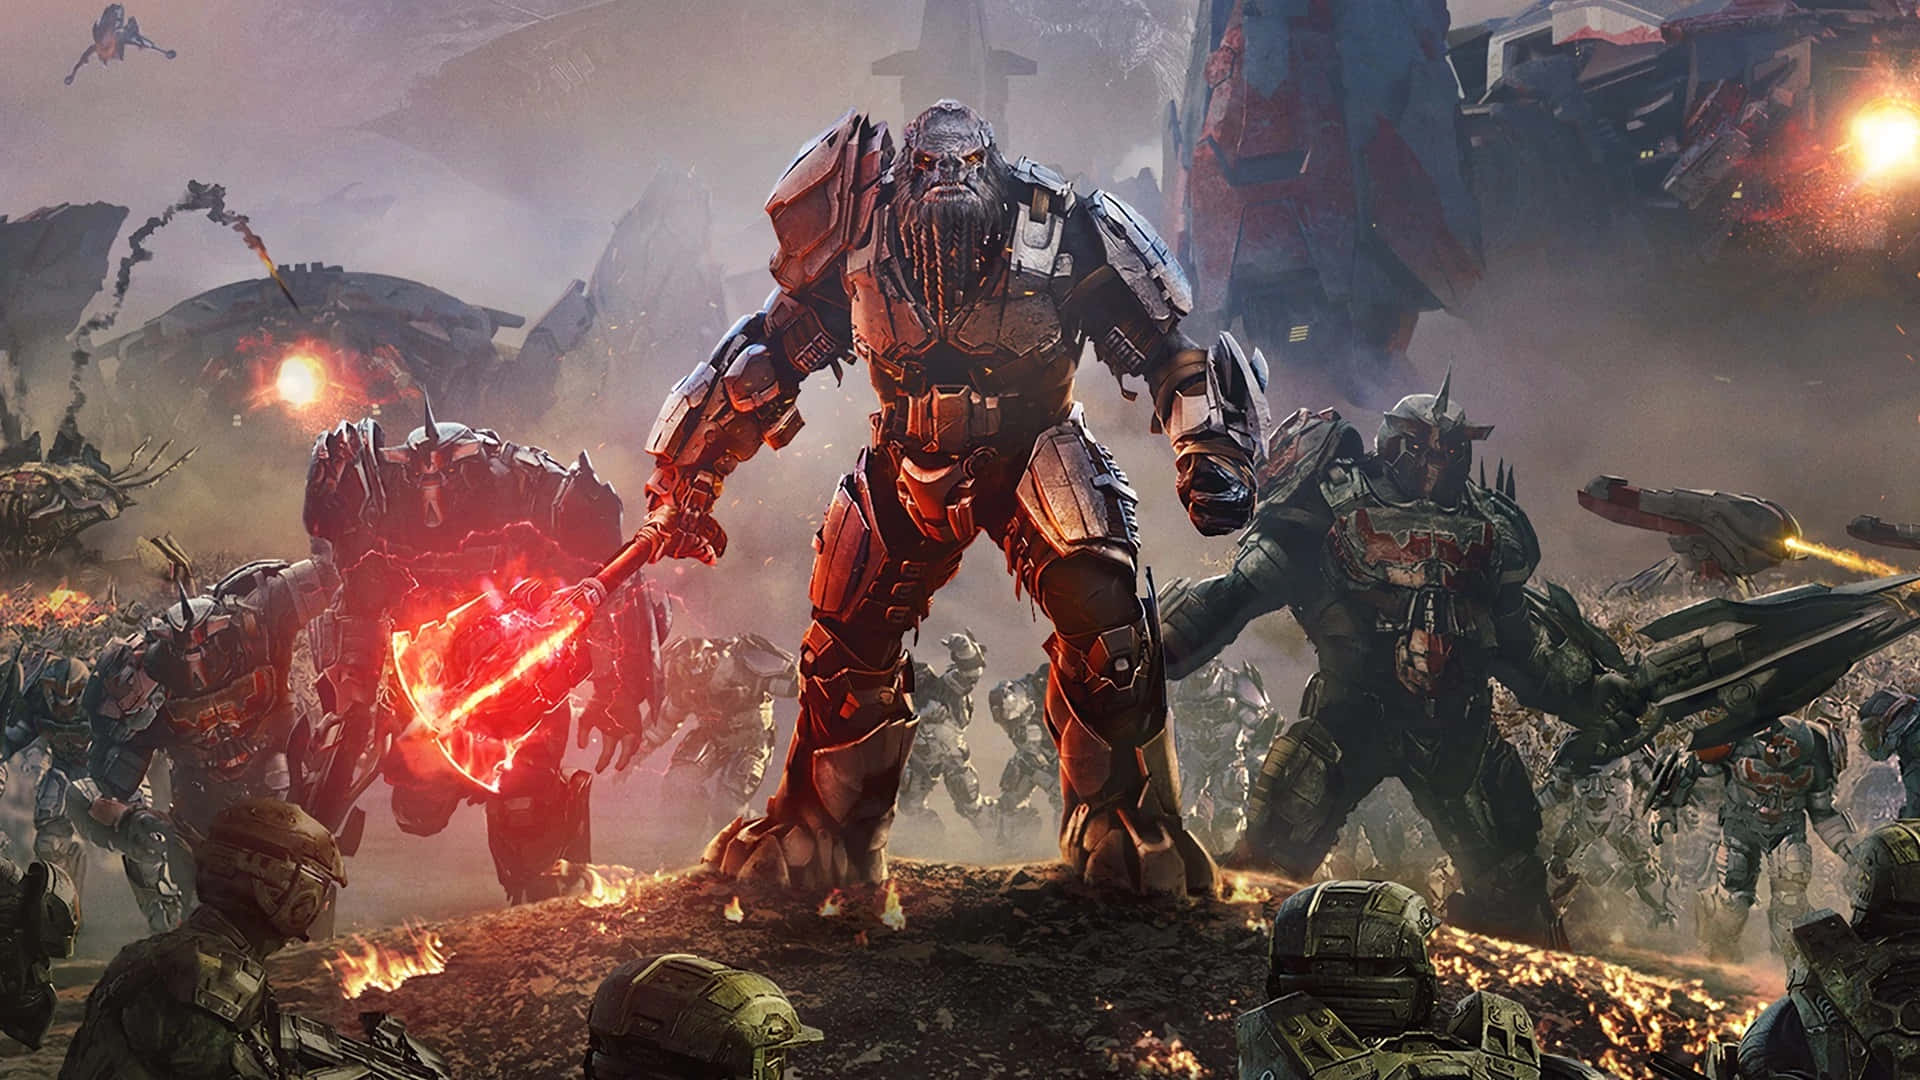 Atriox, the Brute Chieftain, standing tall in defiance Wallpaper